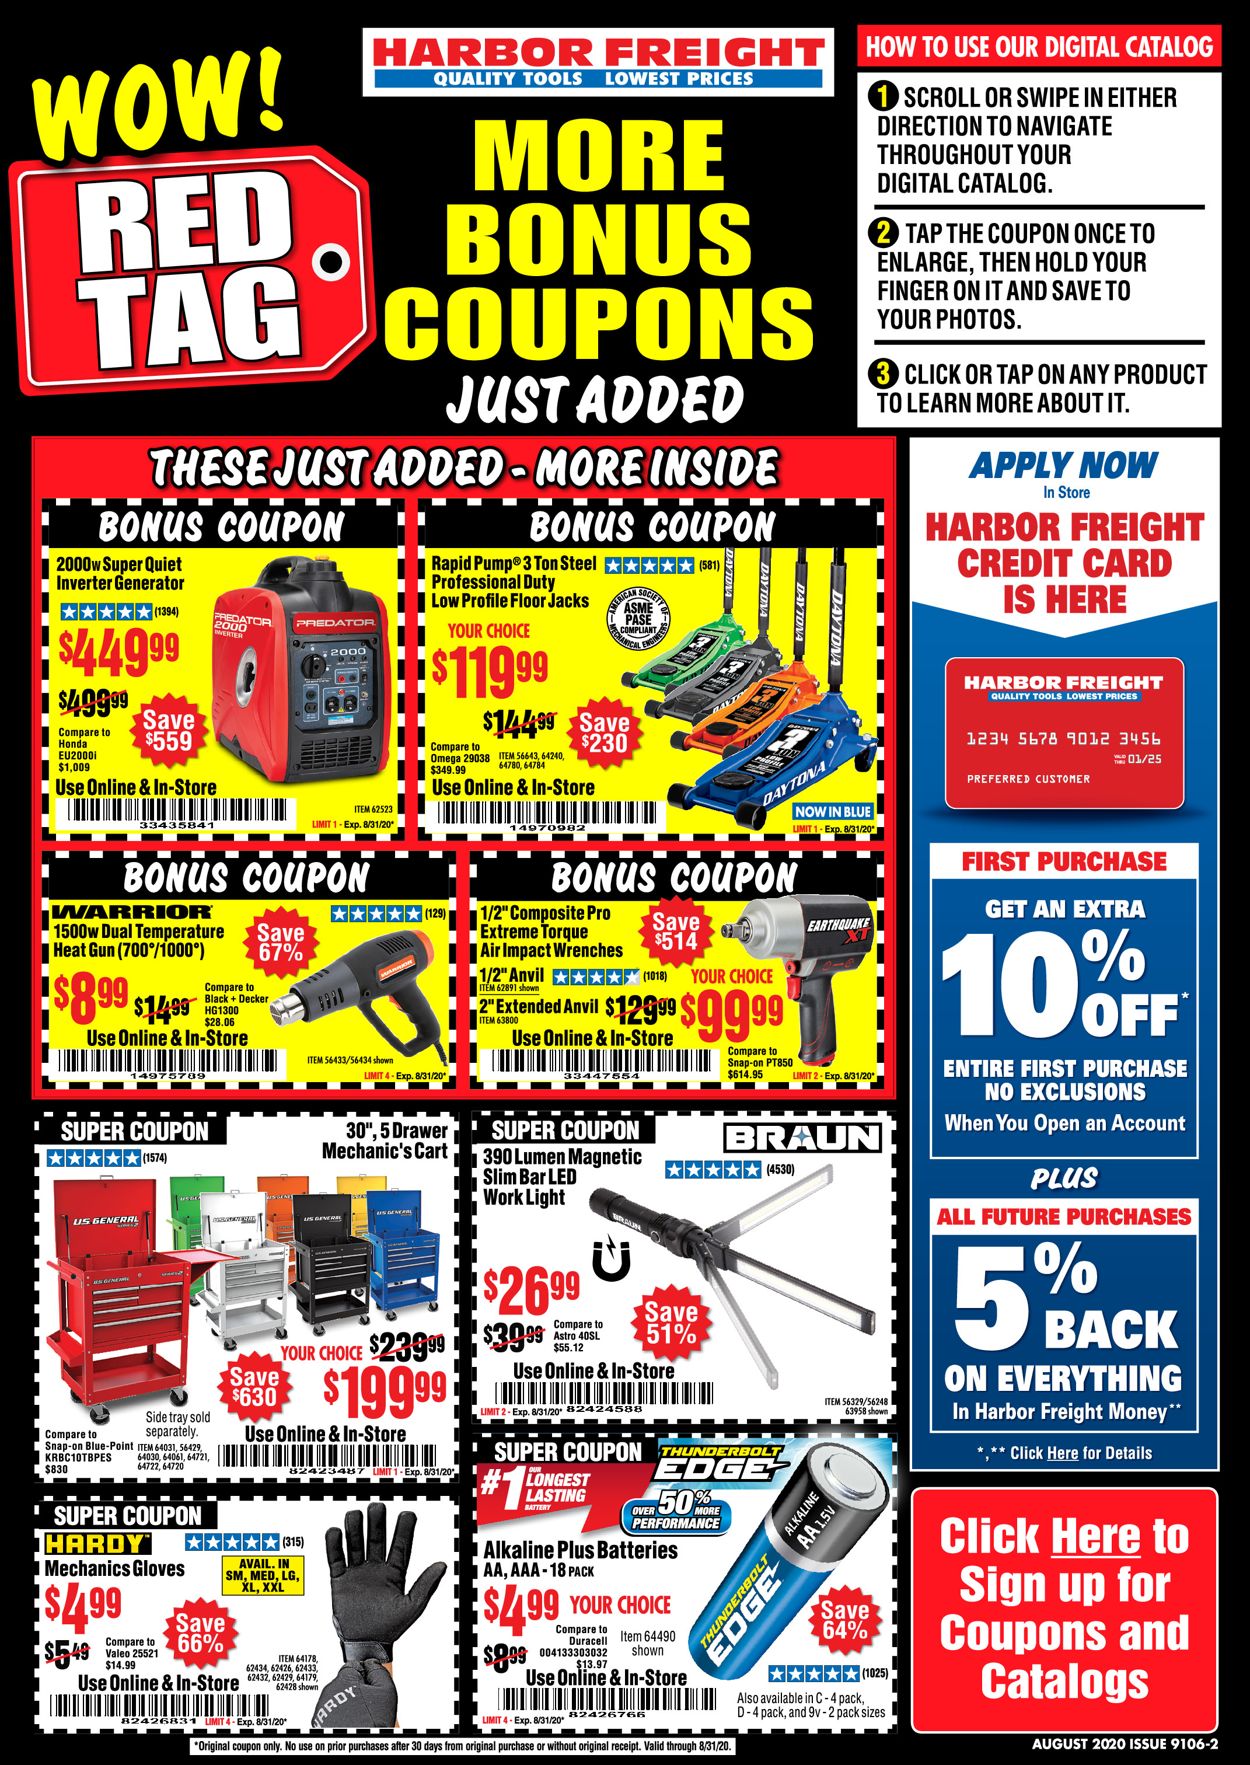 Harbor Freight Current weekly ad 08/01 08/31/2020